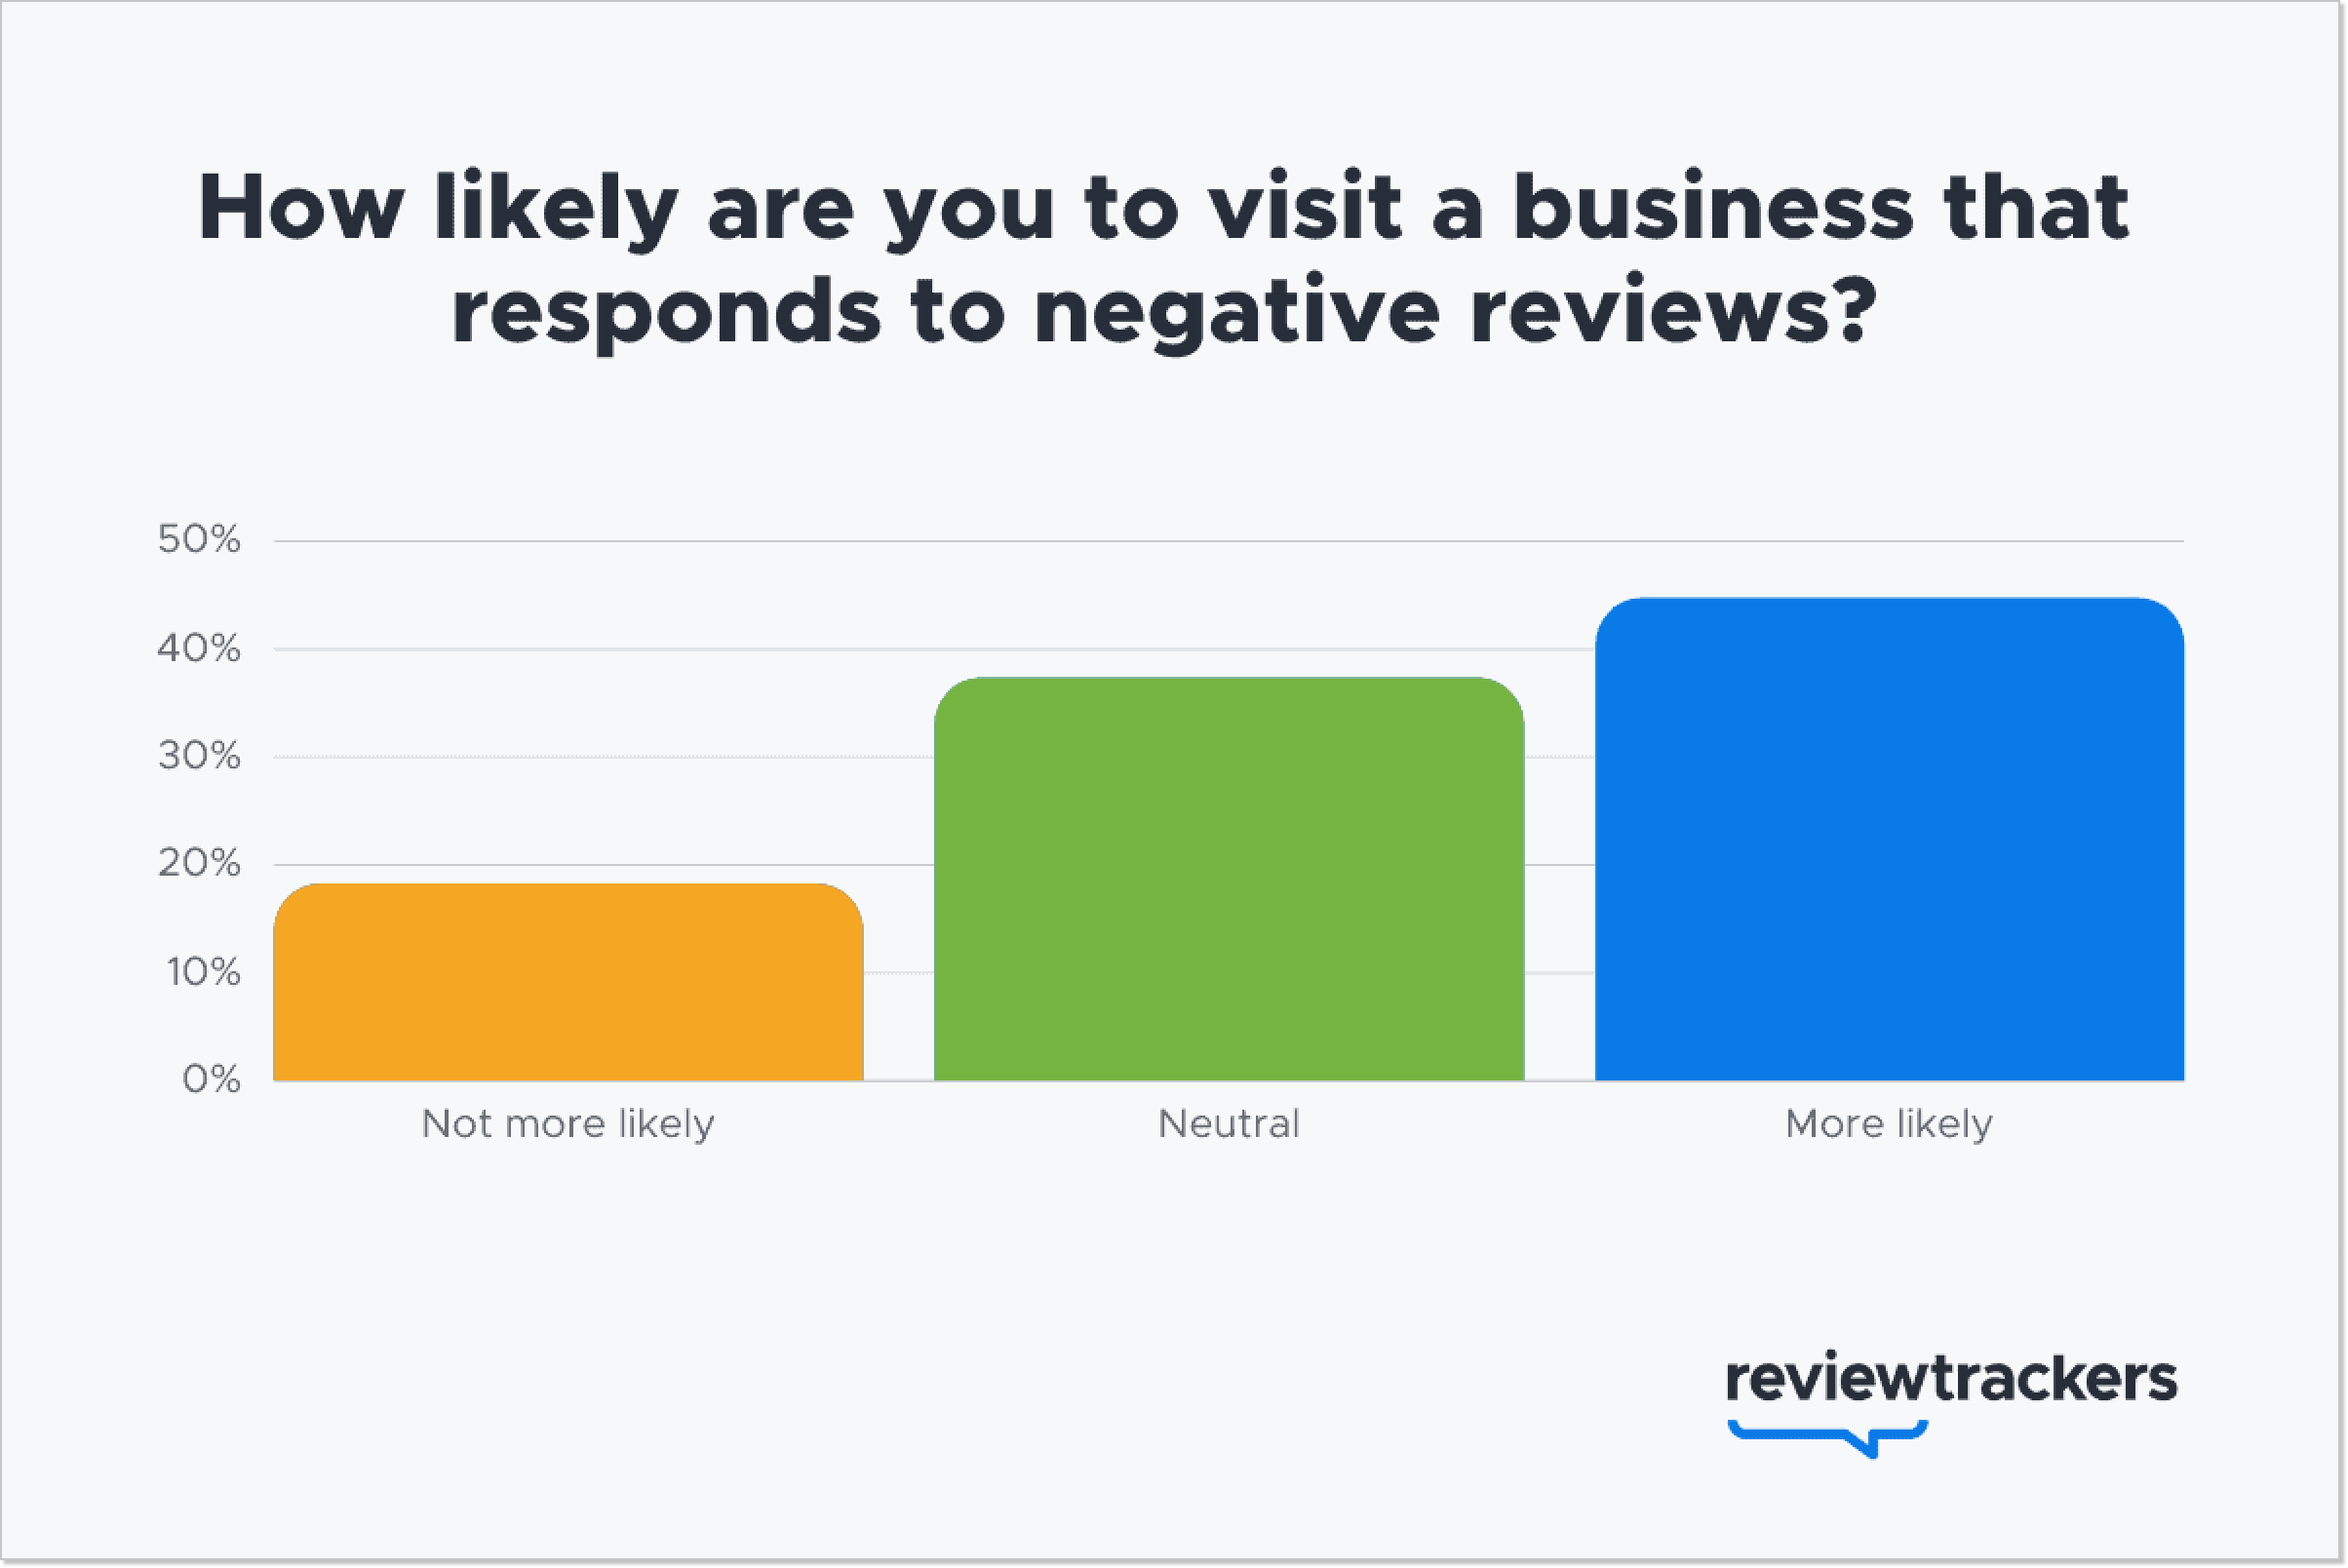  Bar chart showing that customers are more likely to visit a business that responds to negative reviews.